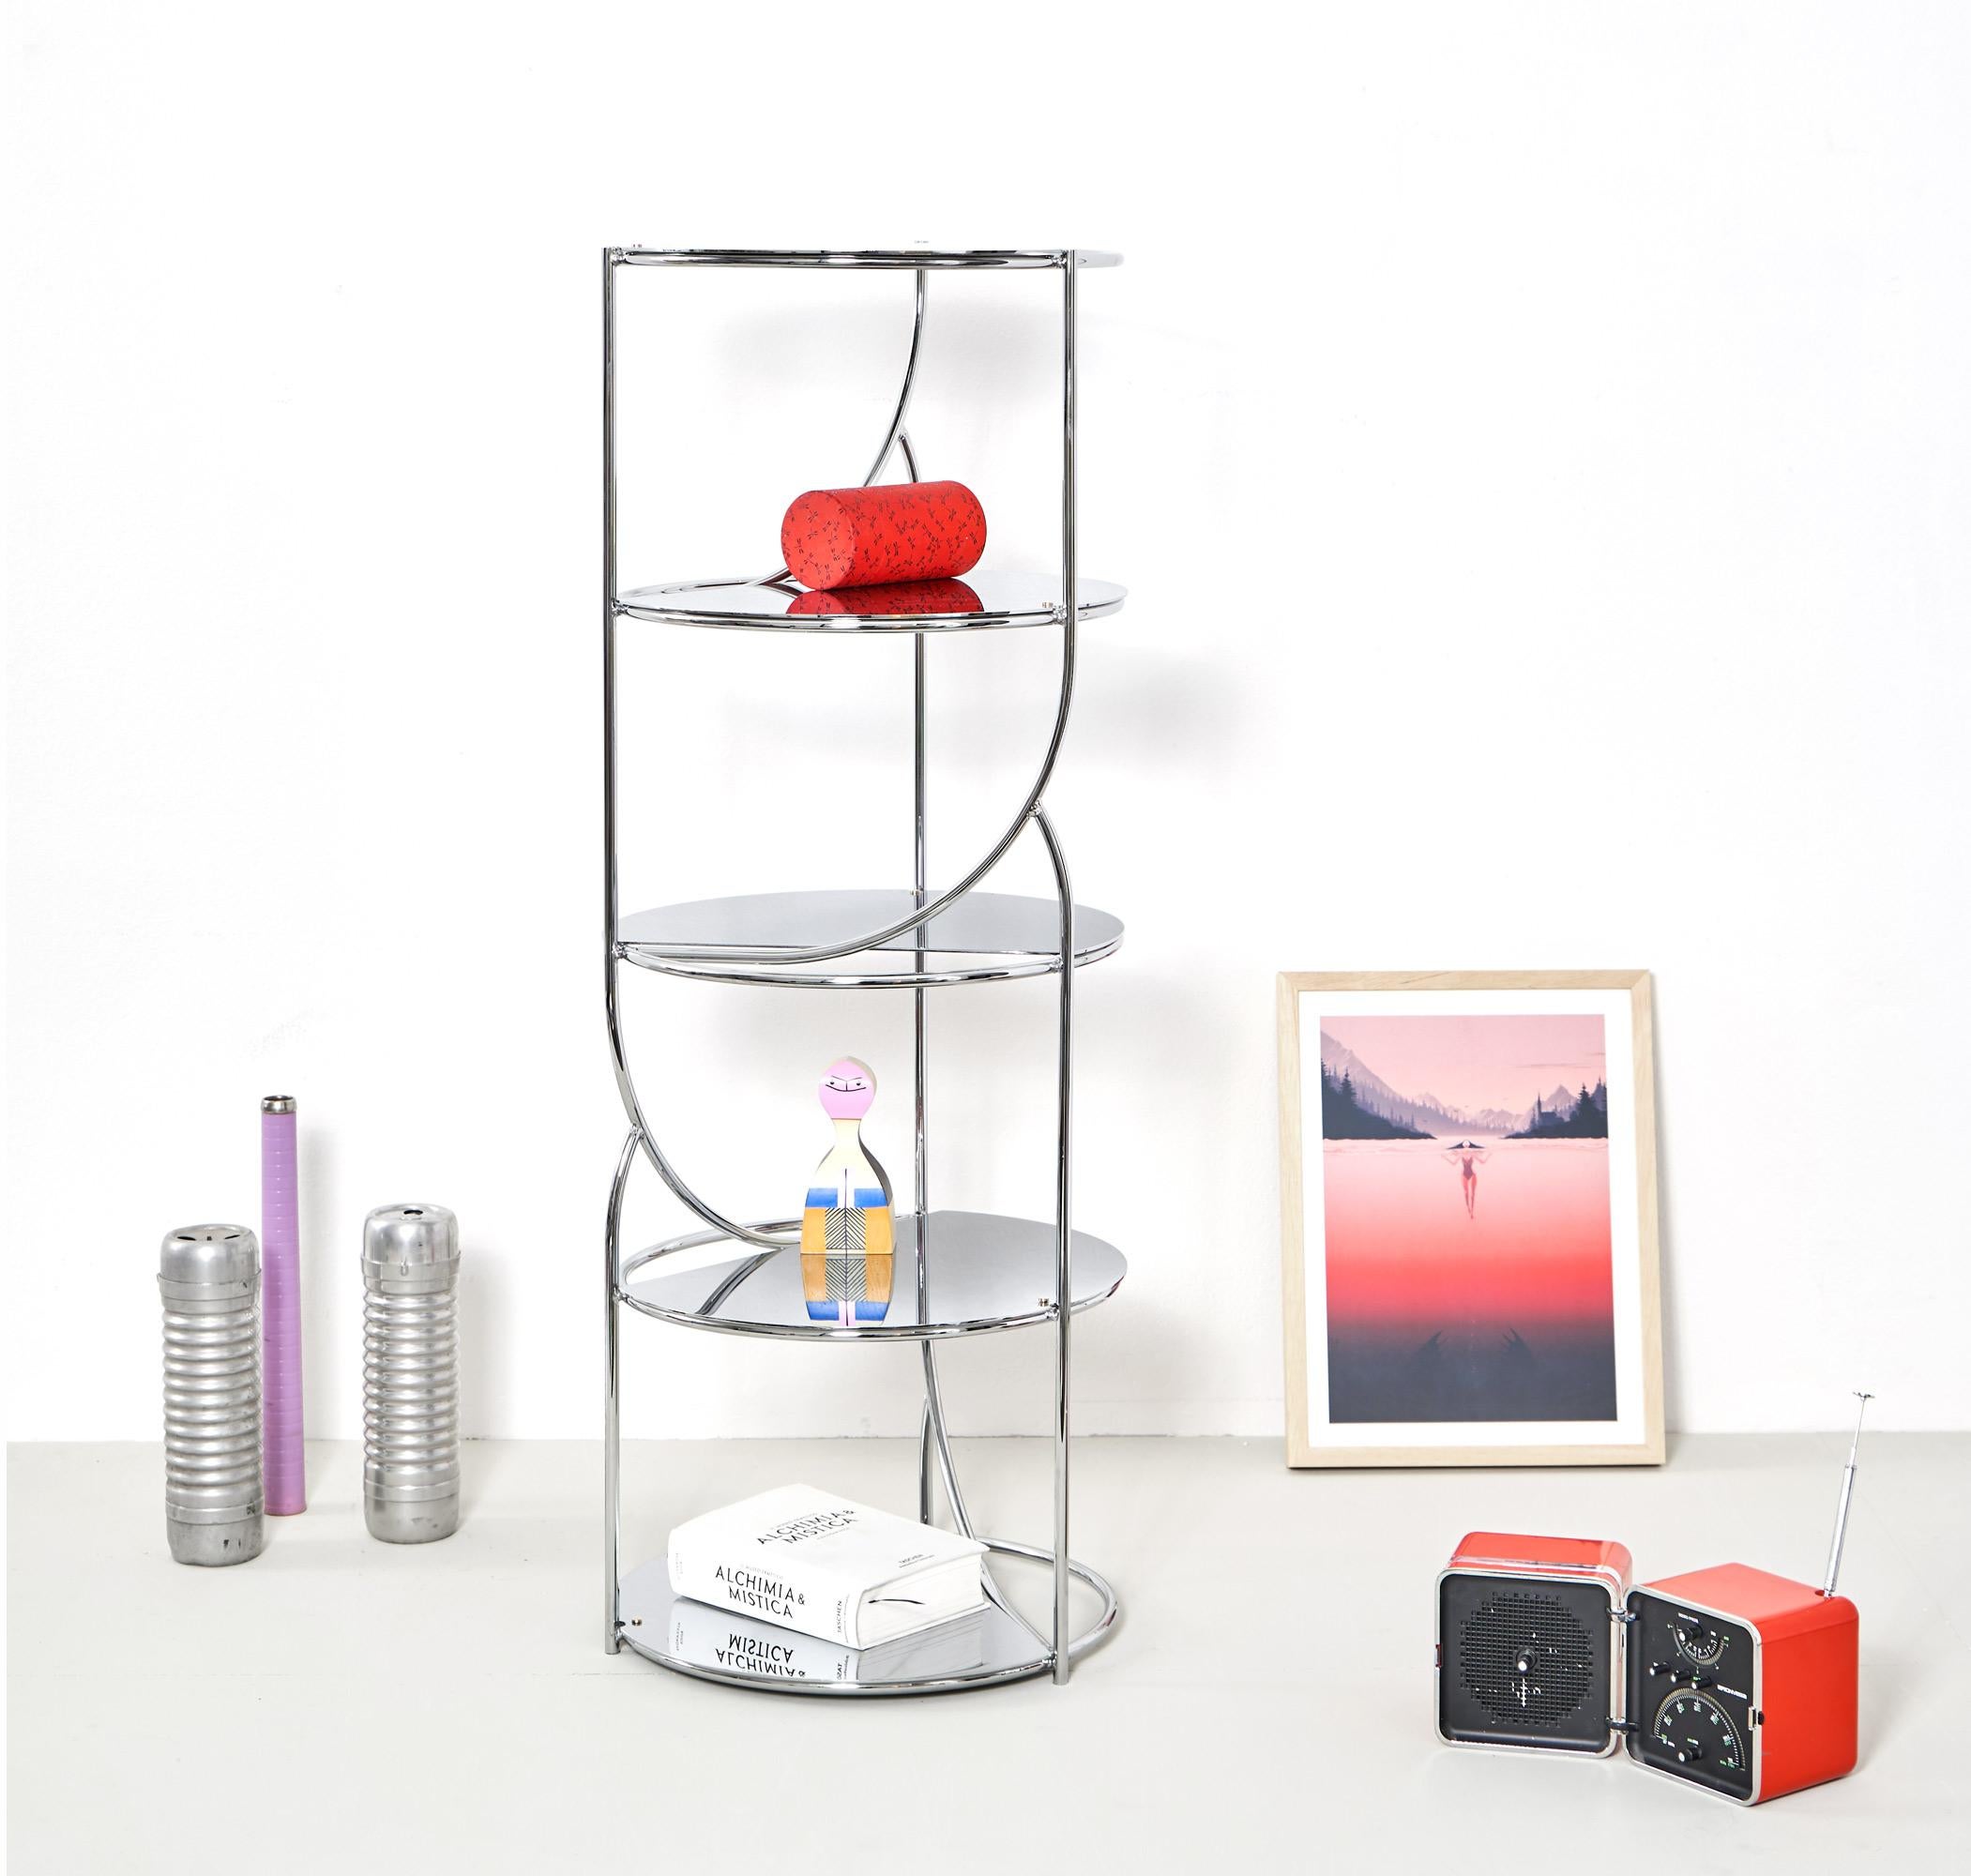 Galvanized Contemporary steel shelf tower, repositionable mirrored shelves made in Italy